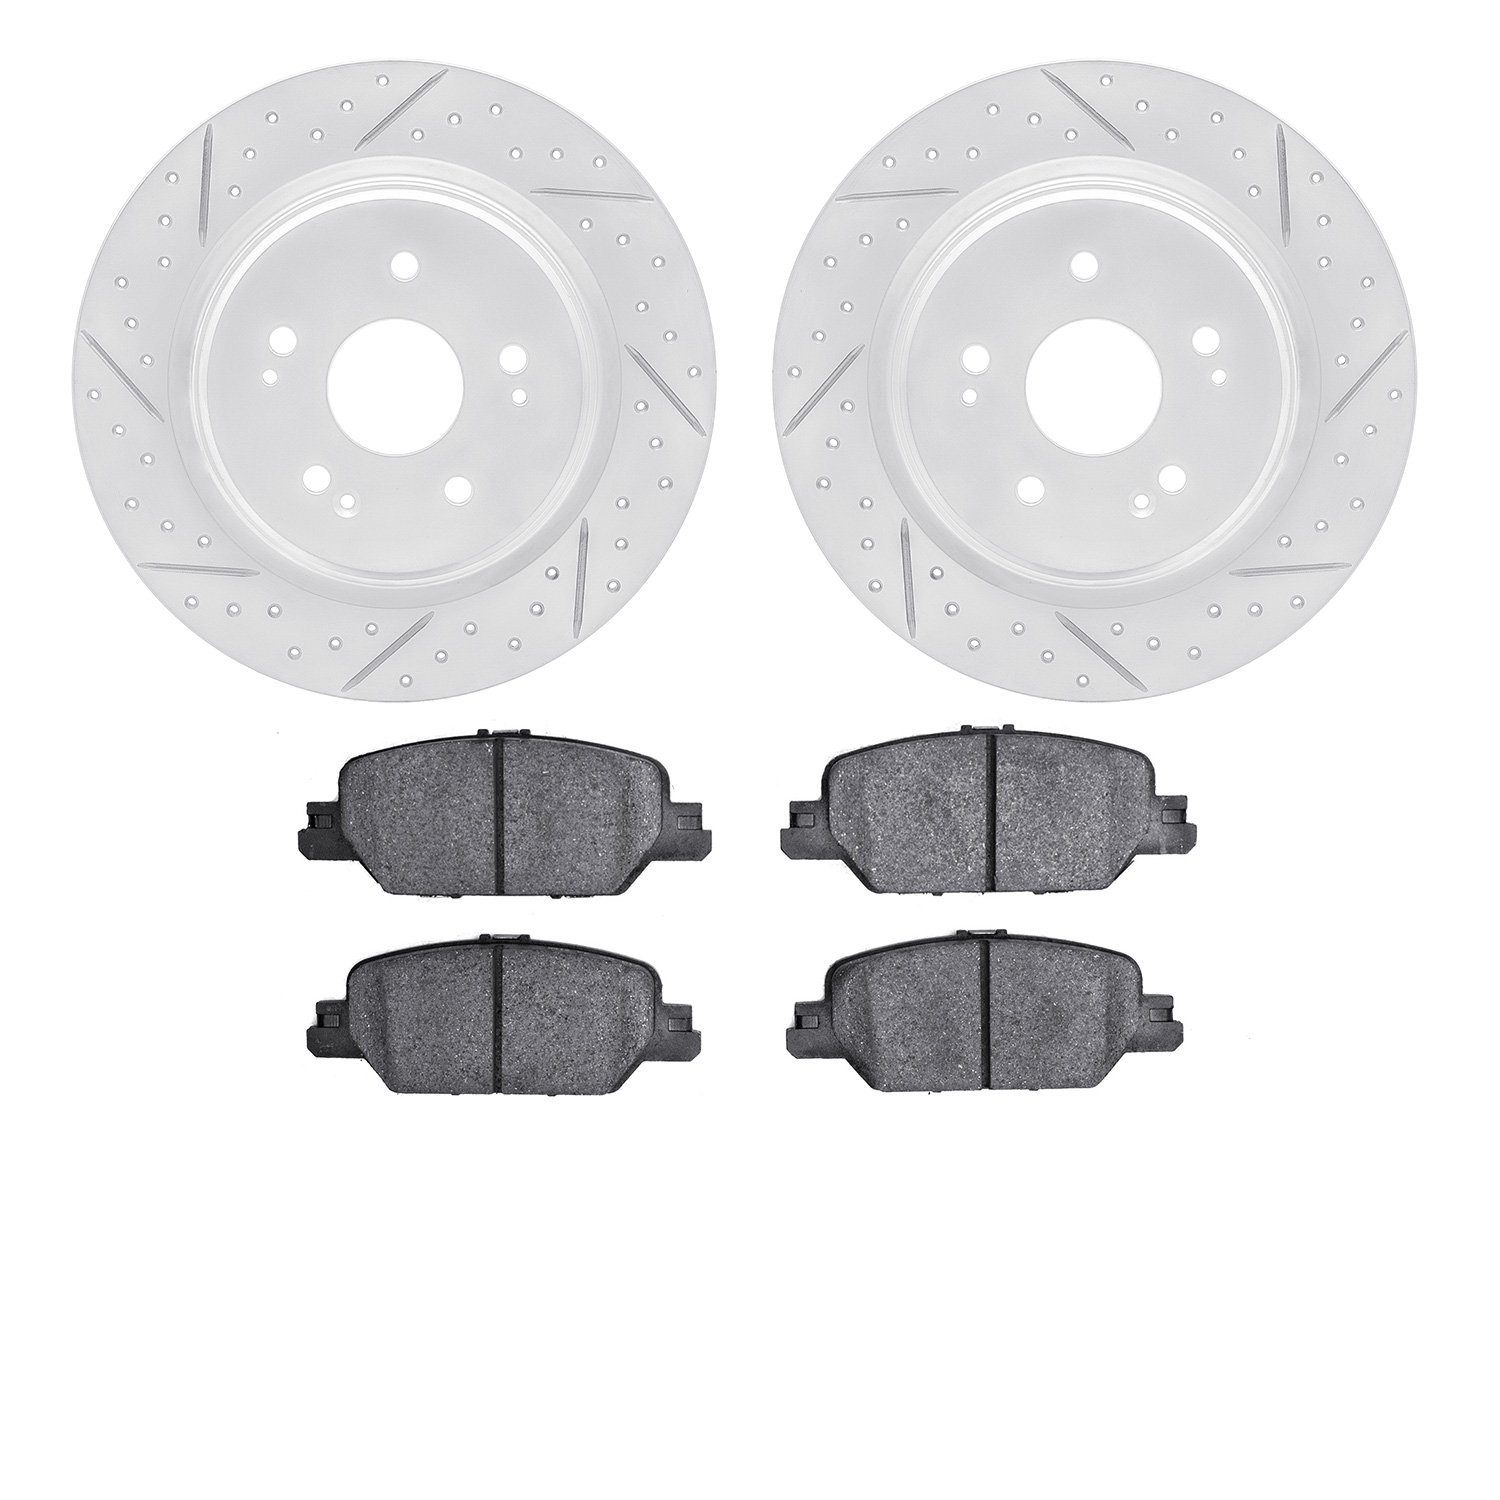 2502-58034 Geoperformance Drilled/Slotted Rotors w/5000 Advanced Brake Pads Kit, Fits Select Acura/Honda, Position: Rear